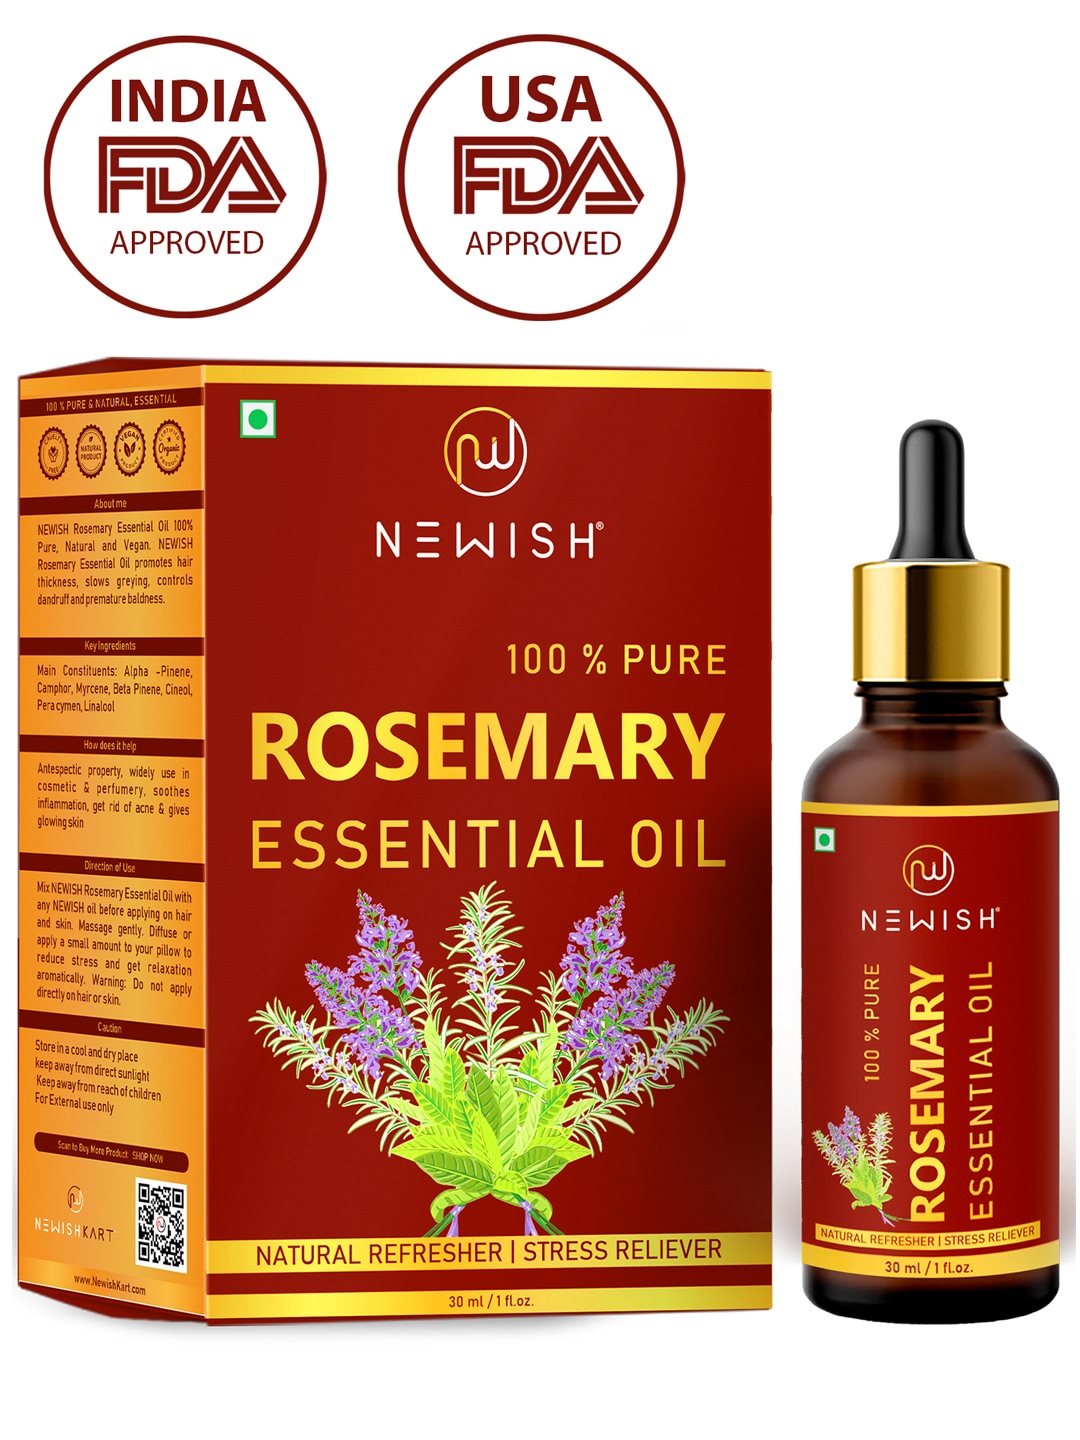 NEWISH Unisex Rosemary Essential Oil for Hair Growth & Skin 30 ml Price in India